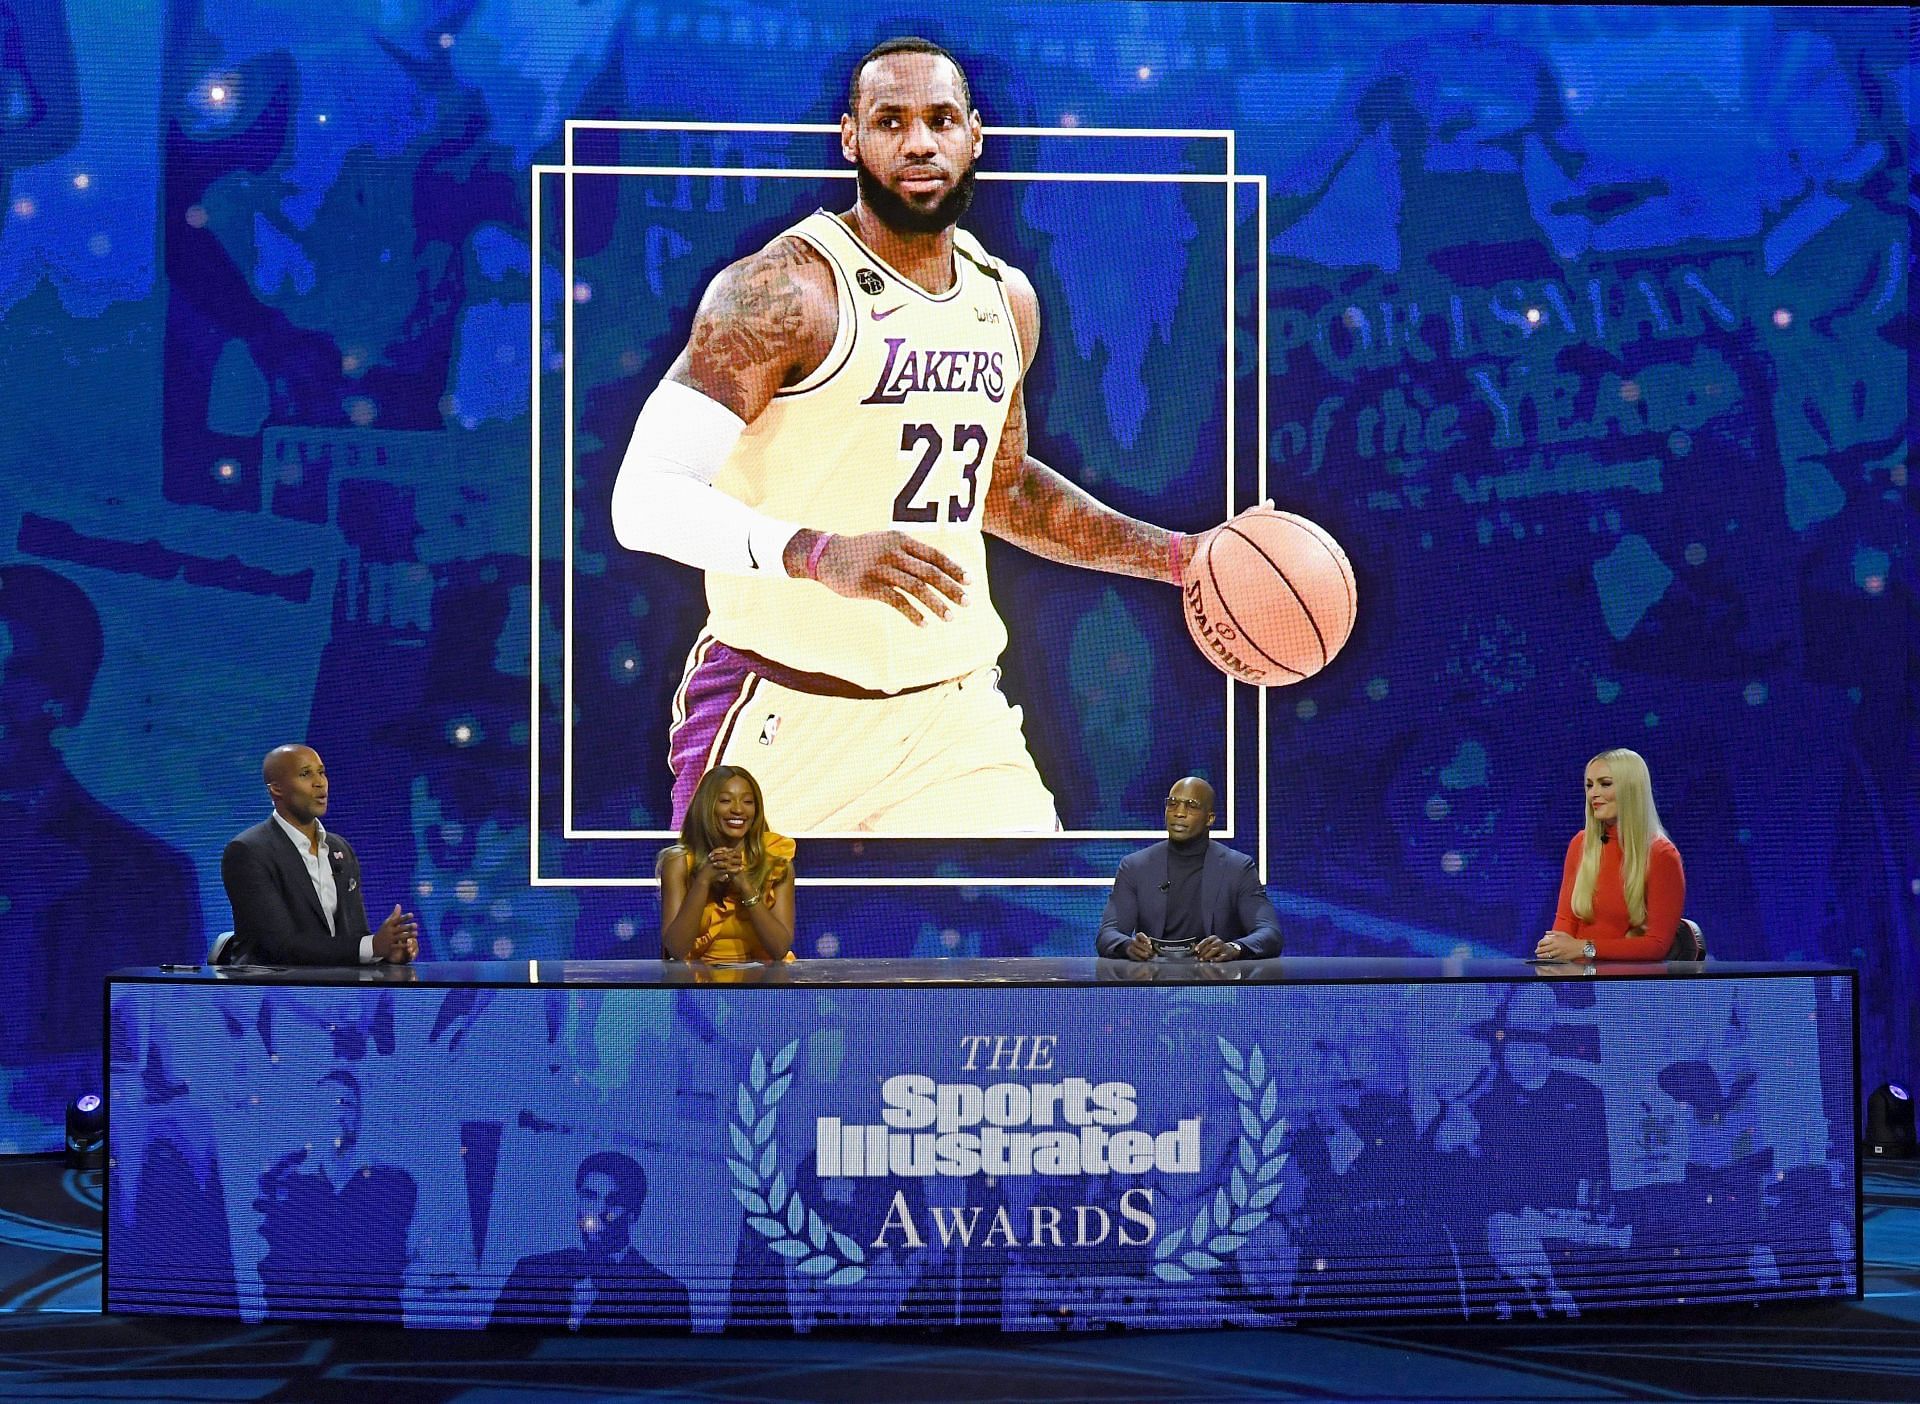 The 2020 Sports Illustrated Awards